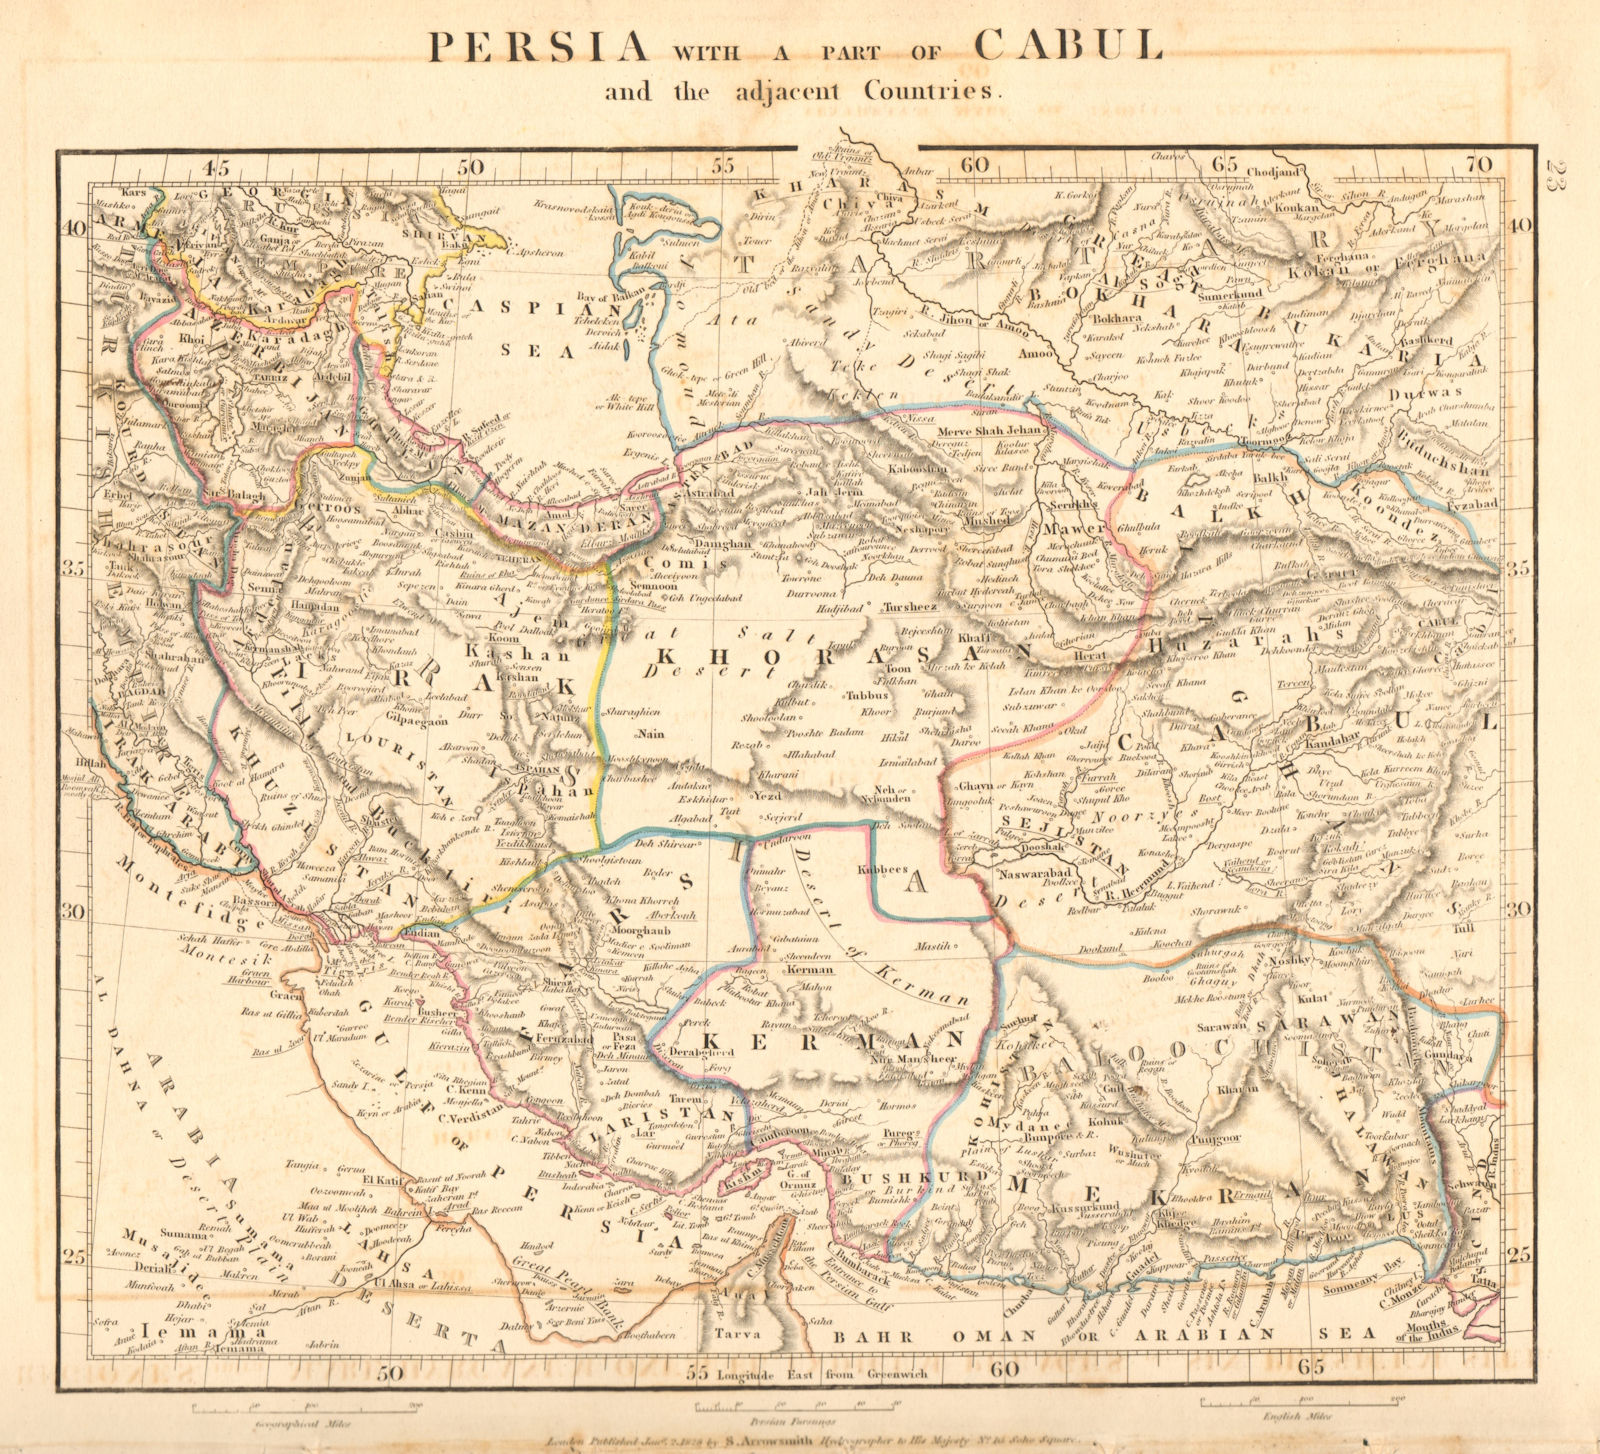 Associate Product SOUTH WEST ASIA. Persia with part of Cabul. Iraq Iran. ARROWSMITH 1828 old map